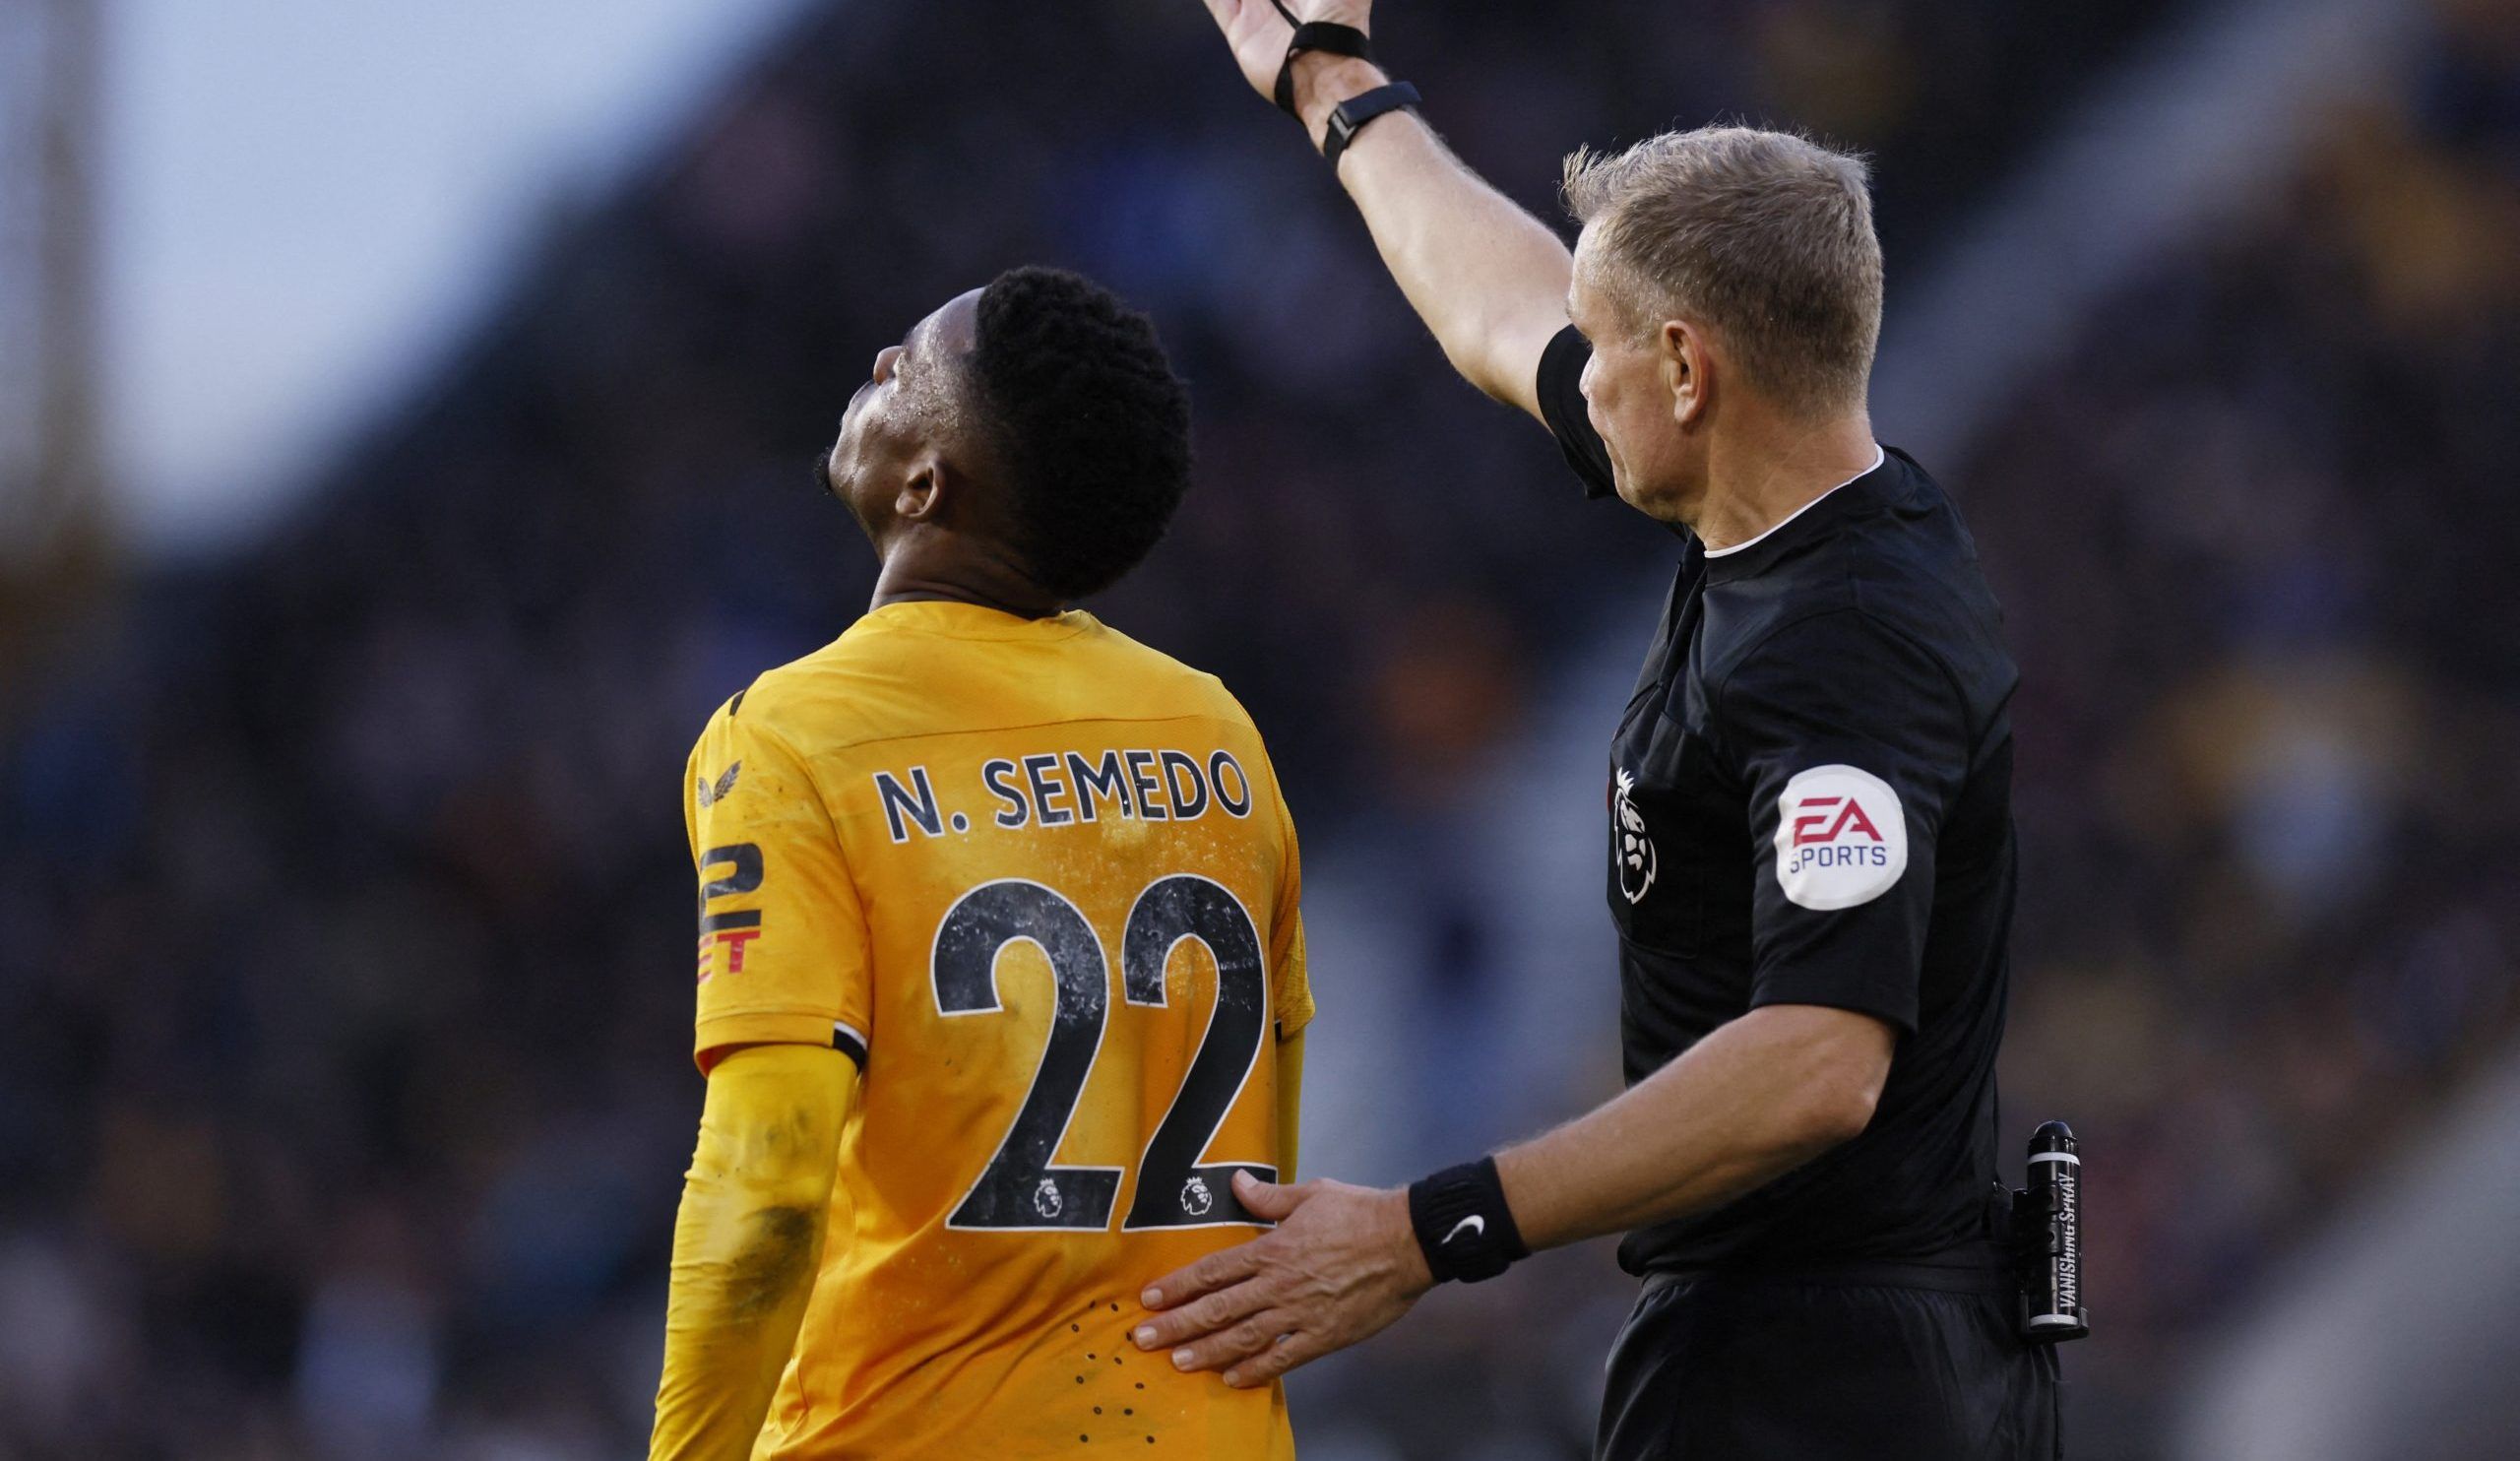 Soccer Football - Premier League - Wolverhampton Wanderers v Brighton &amp; Hove Albion - Molineux Stadium, Wolverhampton, Britain - November 5, 2022  Wolverhampton Wanderers' Nelson Semedo reacts after being shown a red card by referee Graham Scott Action Images via Reuters/Andrew Couldridge EDITORIAL USE ONLY. No use with unauthorized audio, video, data, fixture lists, club/league logos or 'live' services. Online in-match use limited to 75 images, no video emulation. No use in betting, games o